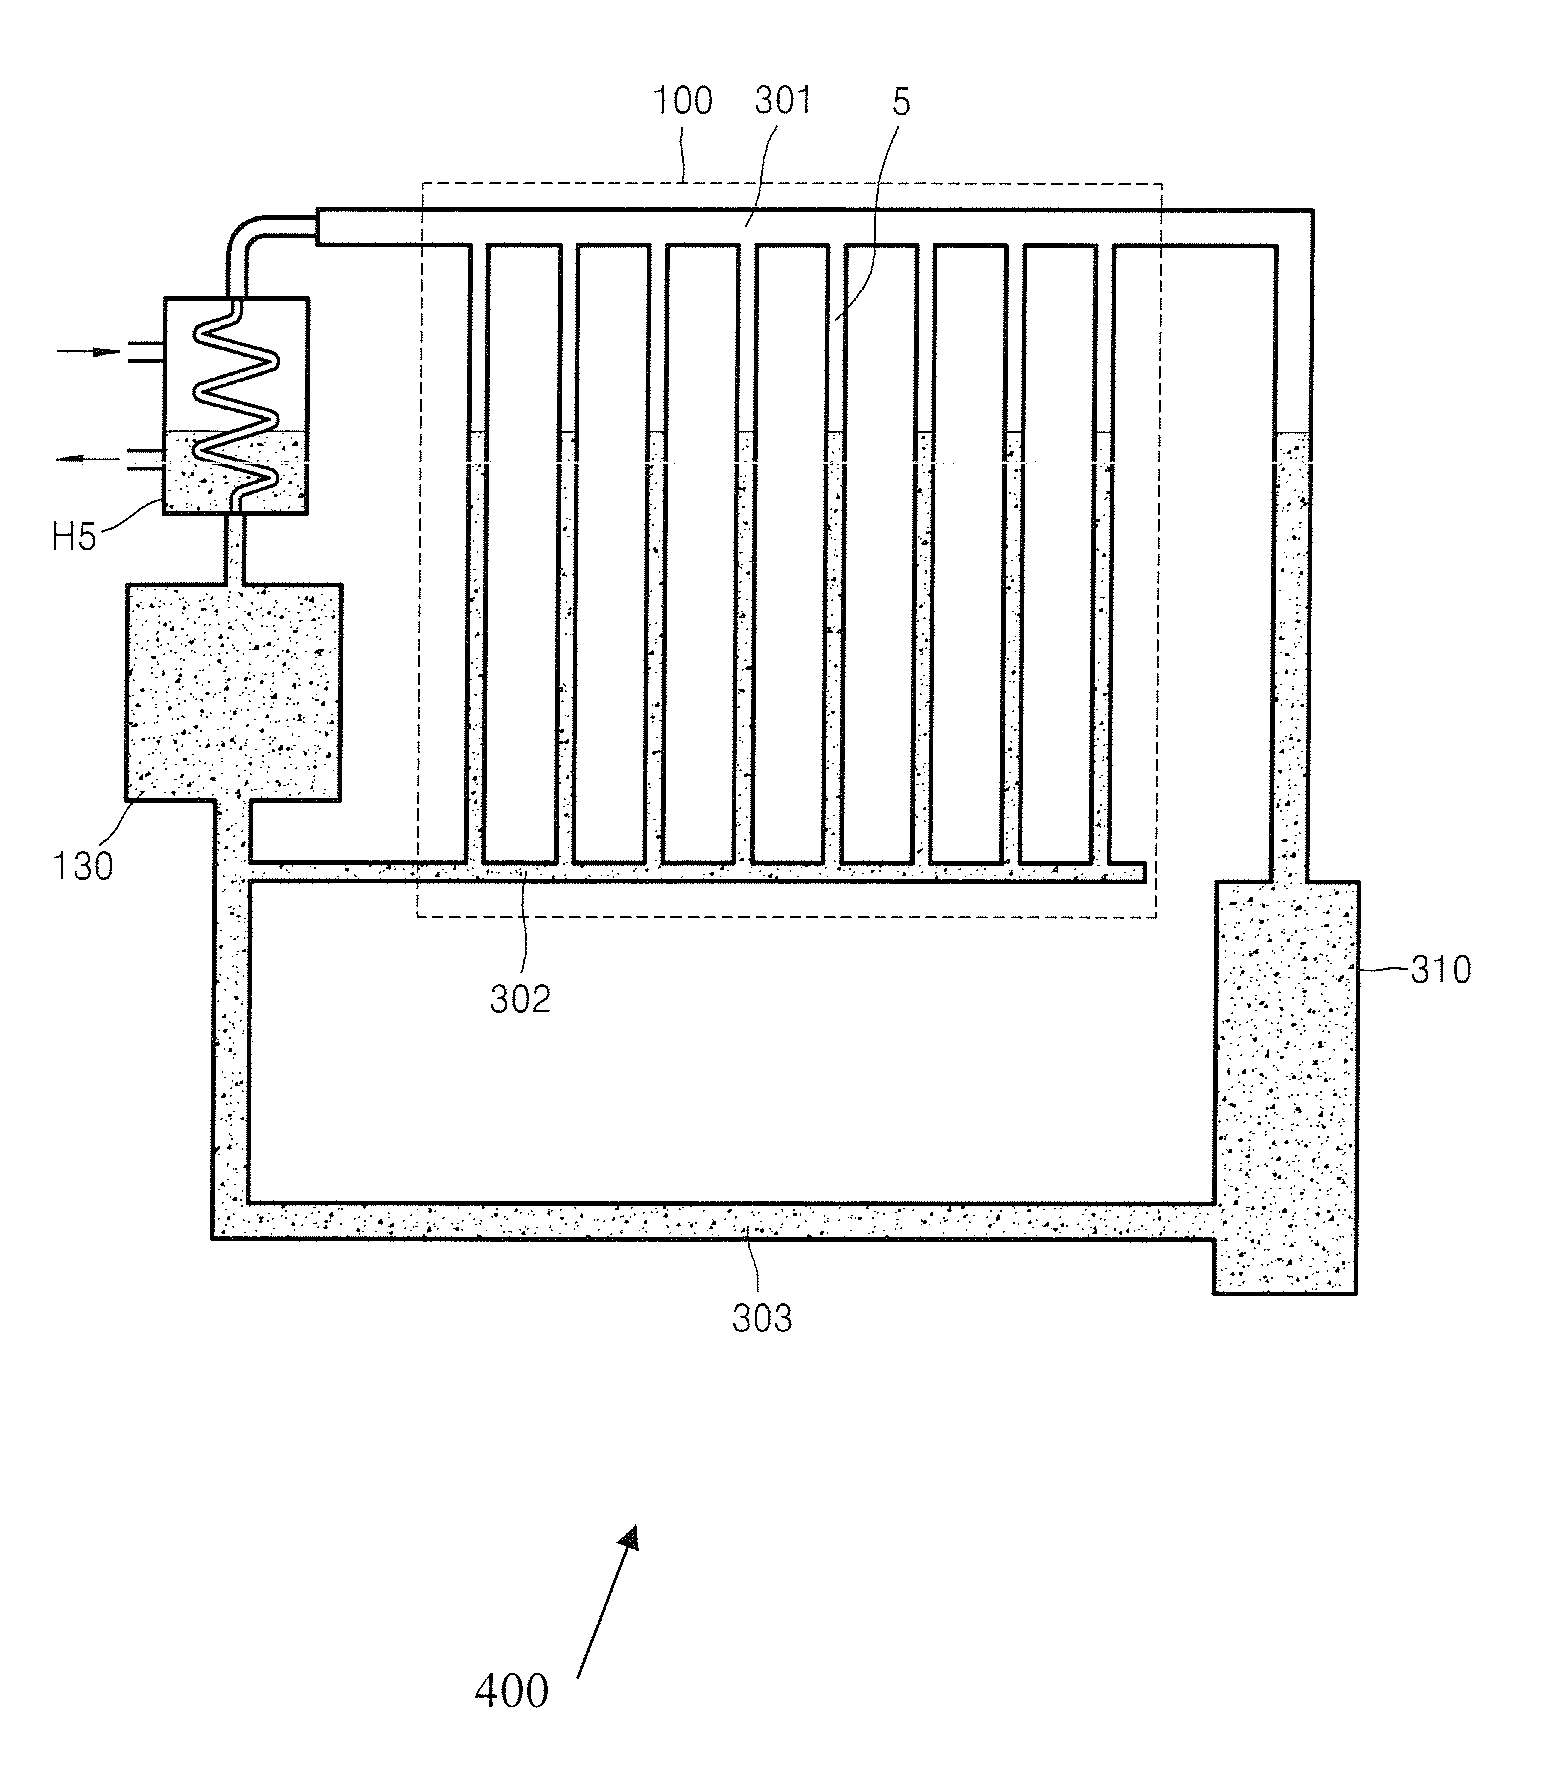 Method of rapidly increasing internal temperature of a fuel cell stack during starting of fuel cell system